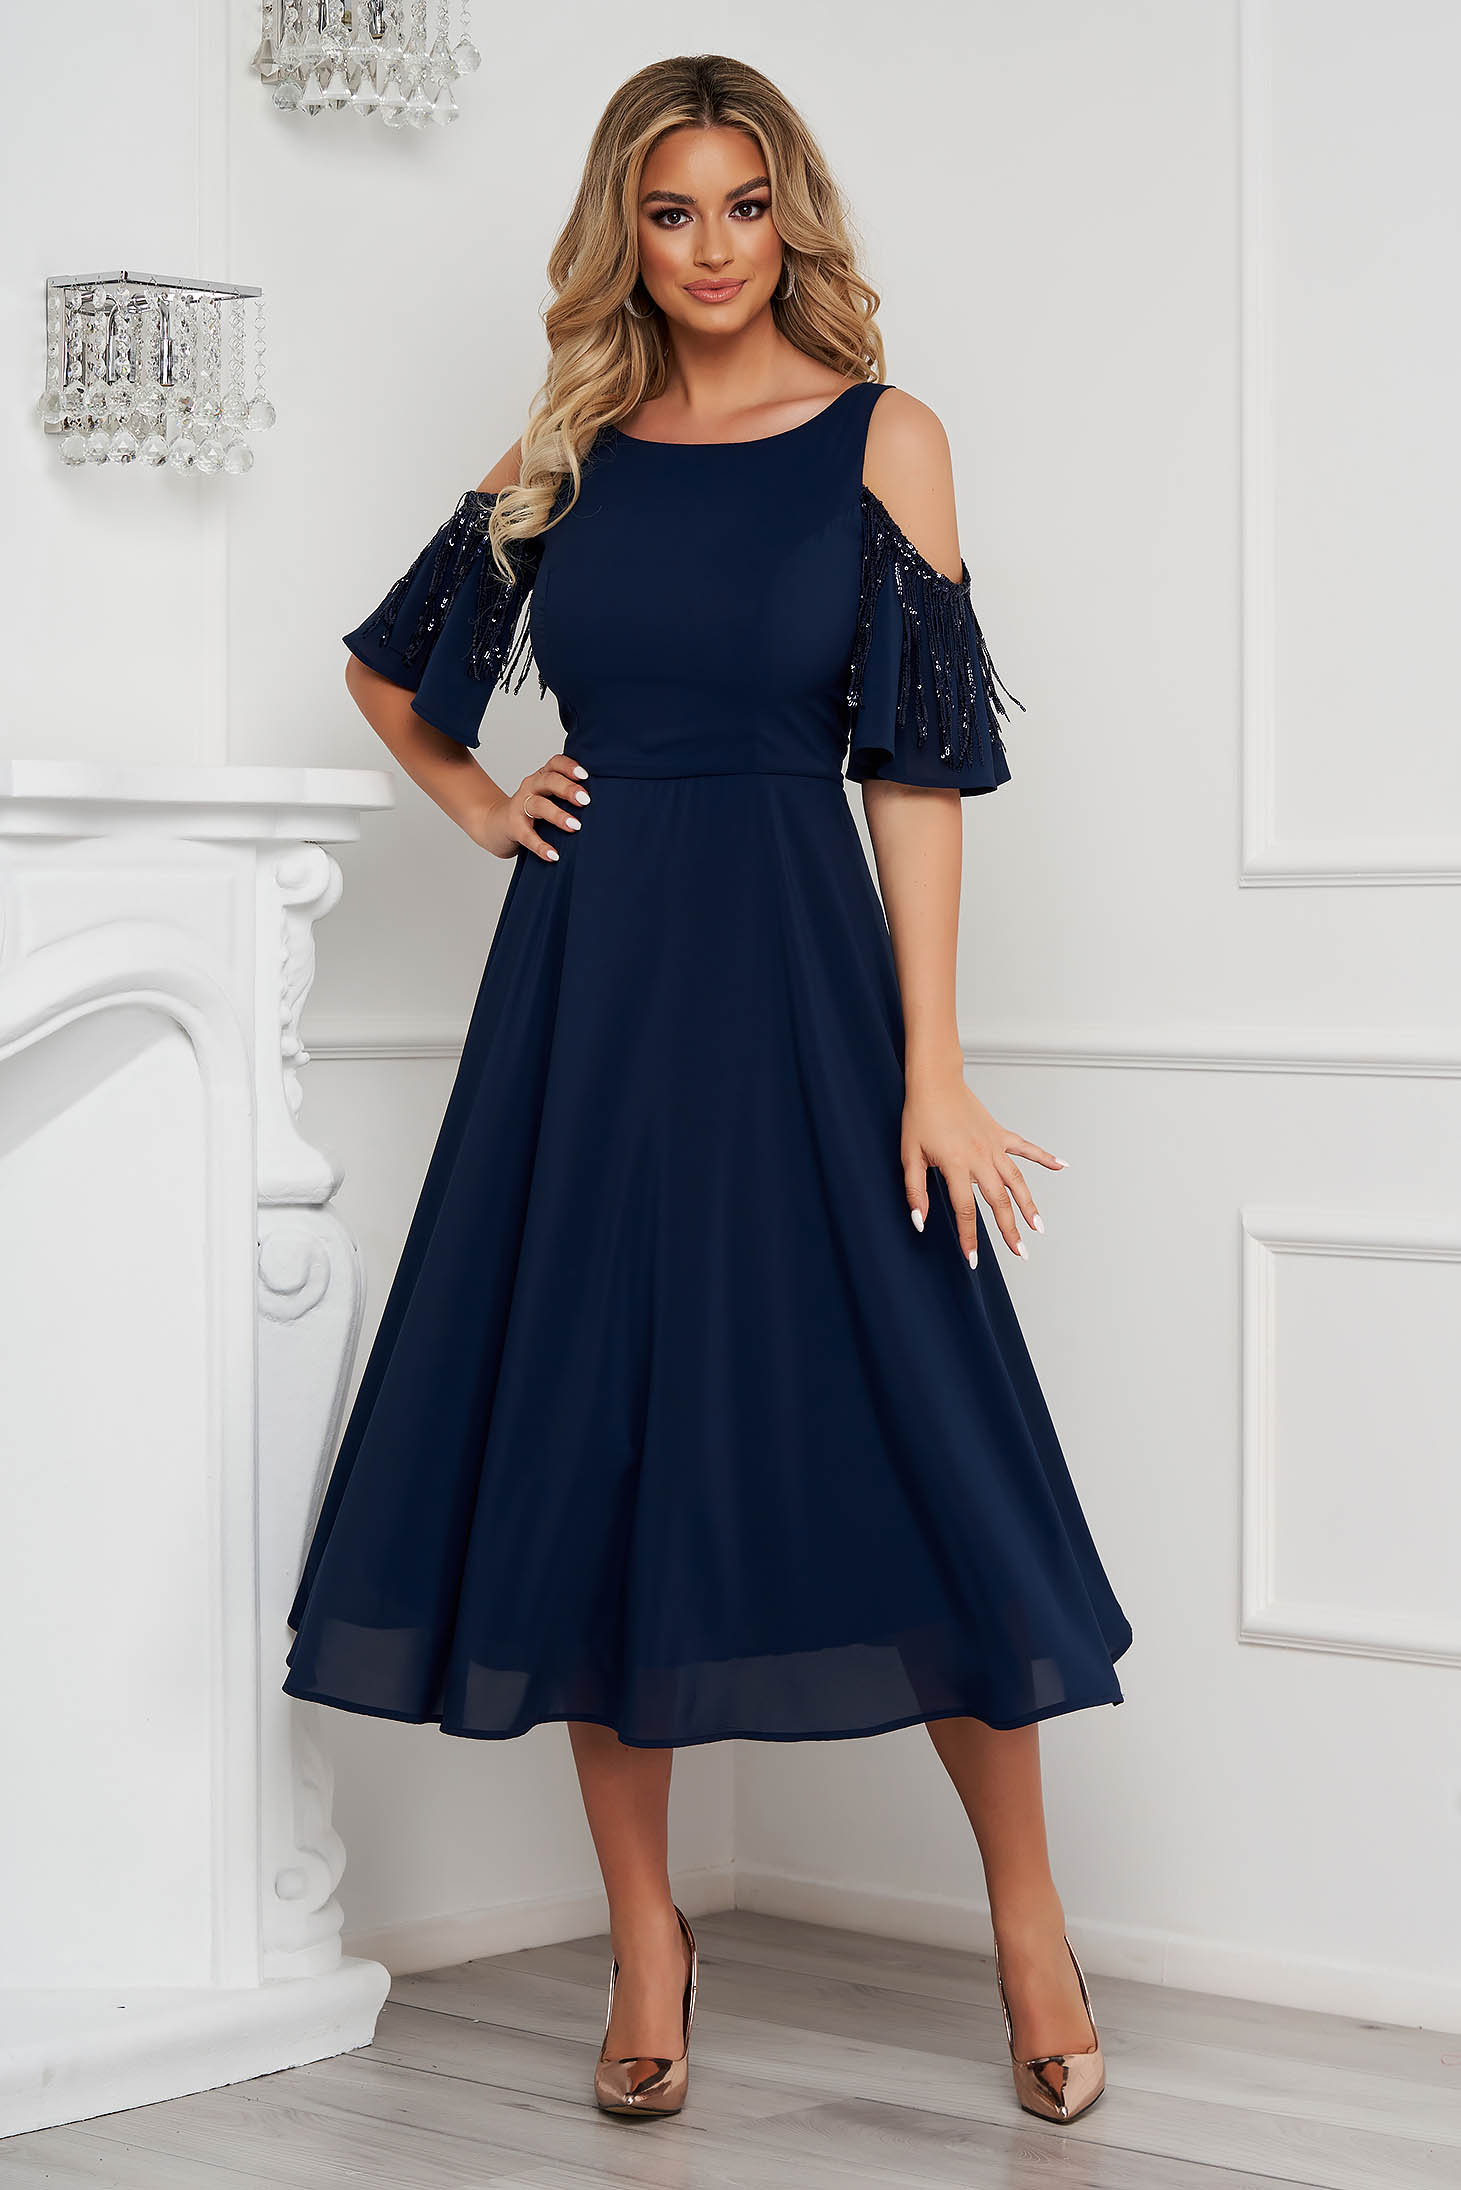 Mid-length Dark Blue Chiffon Dress with Sequin Applications - StarShinerS Flared